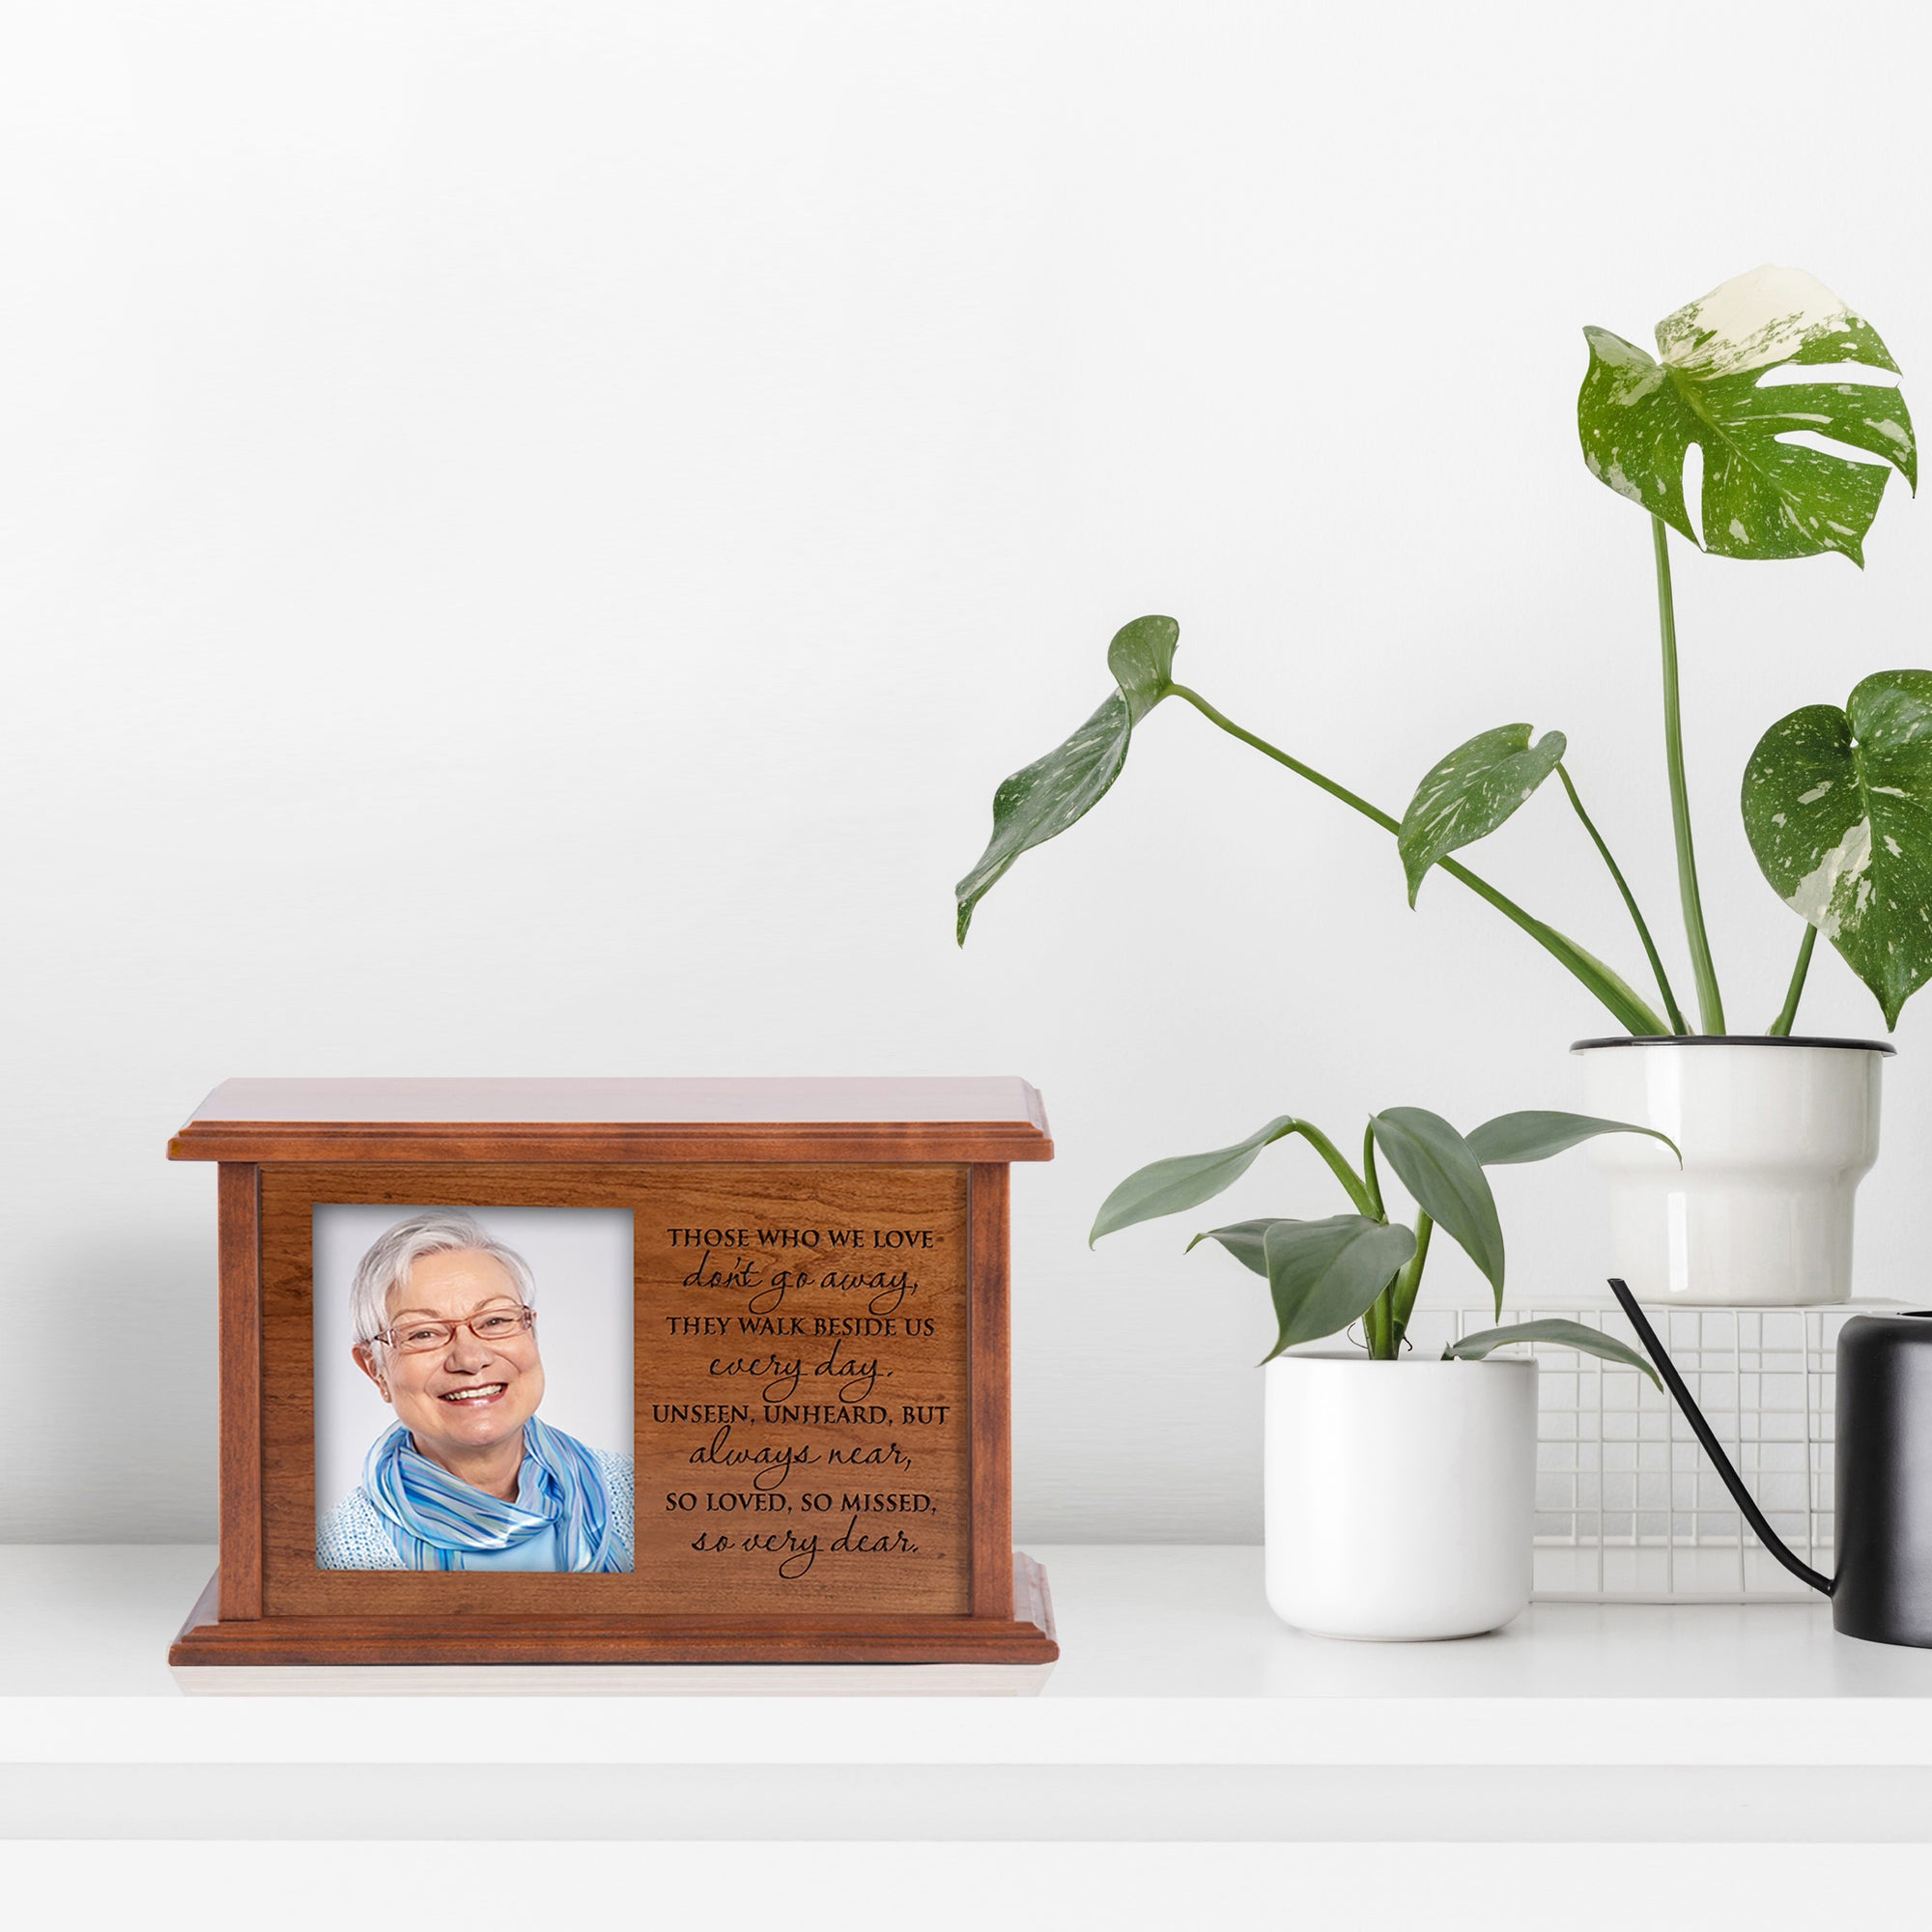 Wooden urns for human ashes